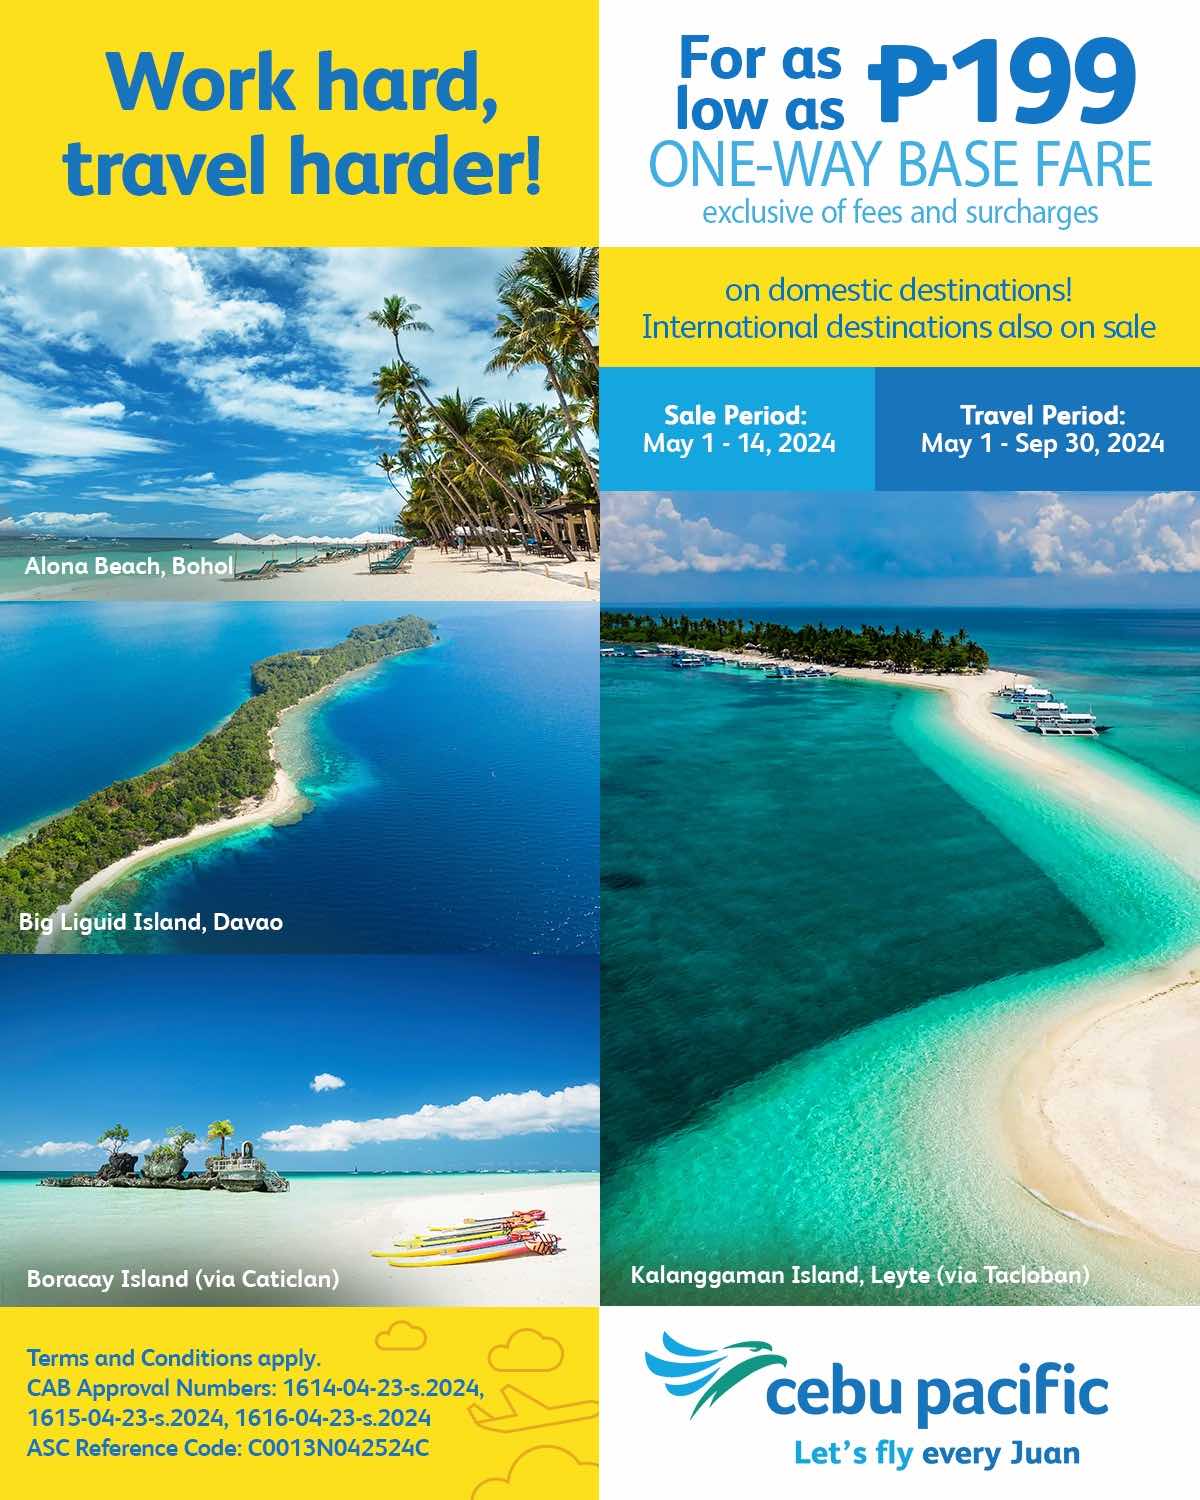 cebu pacific offers p199 one-way base fares until may 14